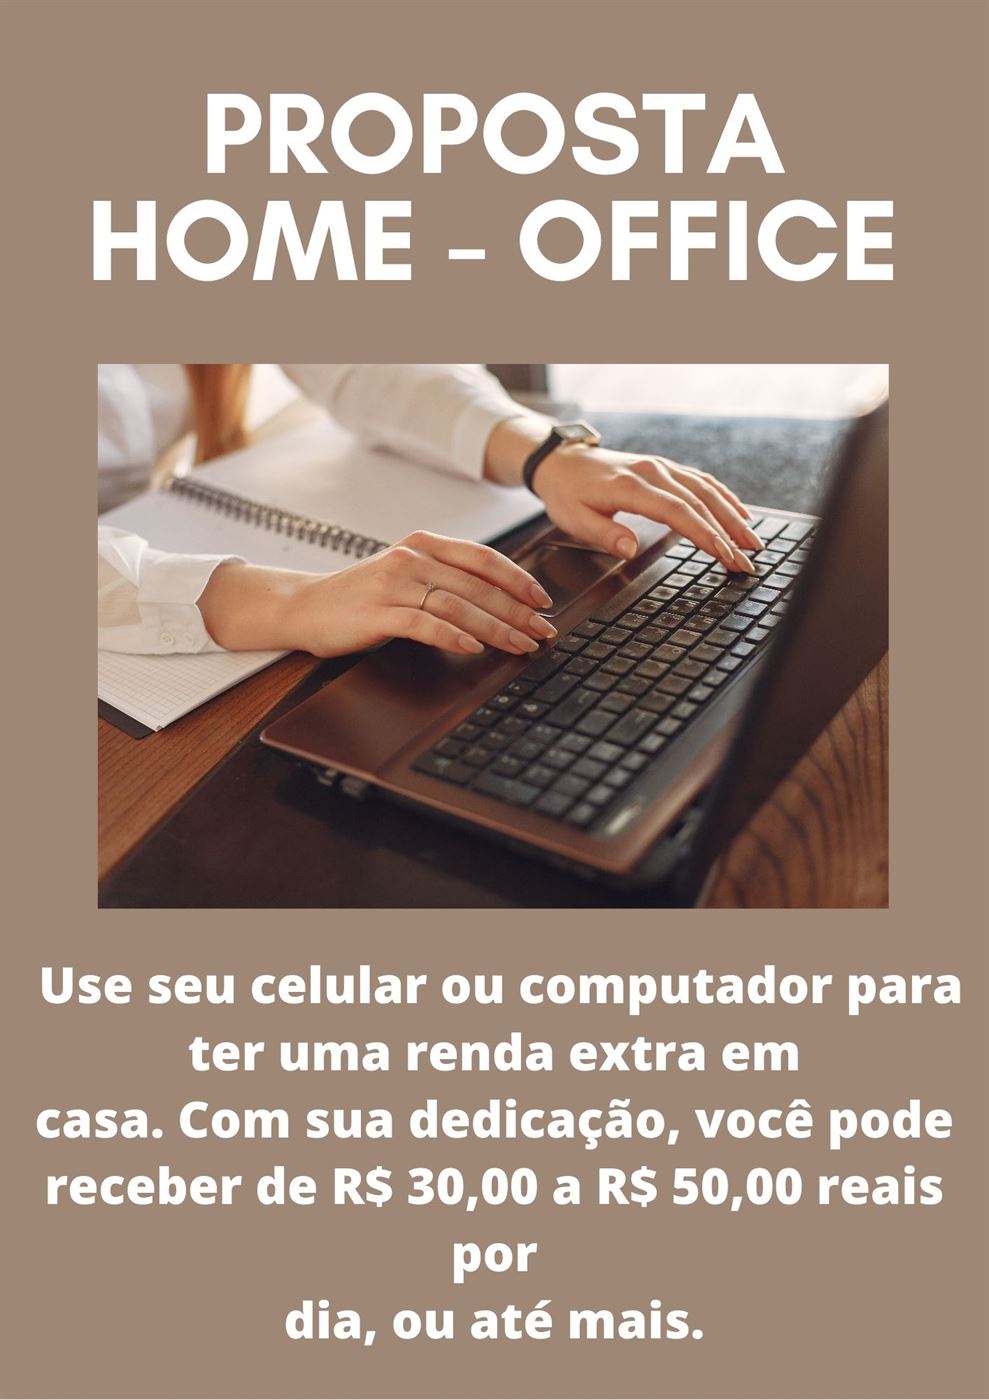 Proposta Home - Office